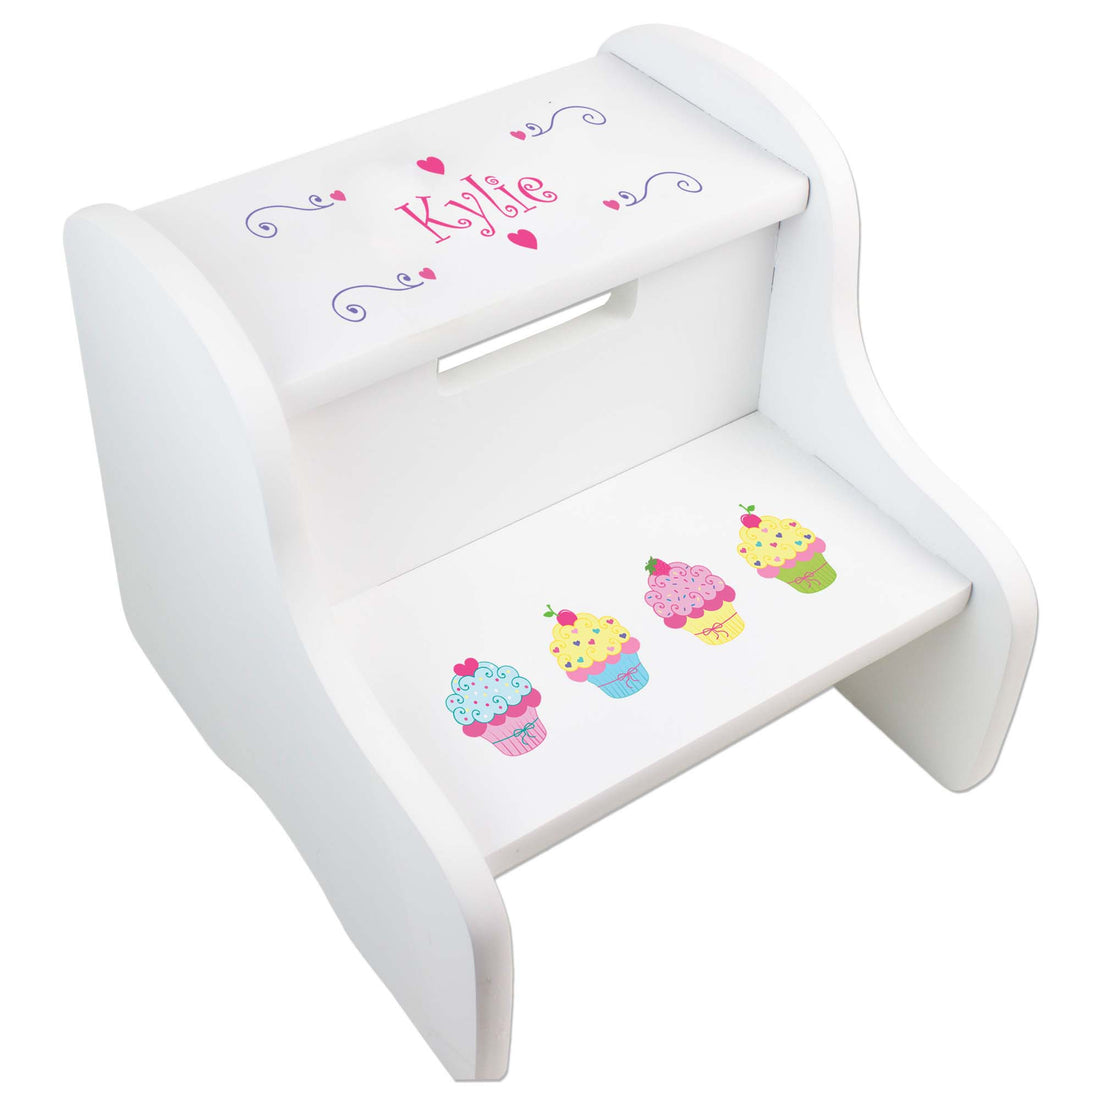 Personalized Cupcakes White Two Step Stool